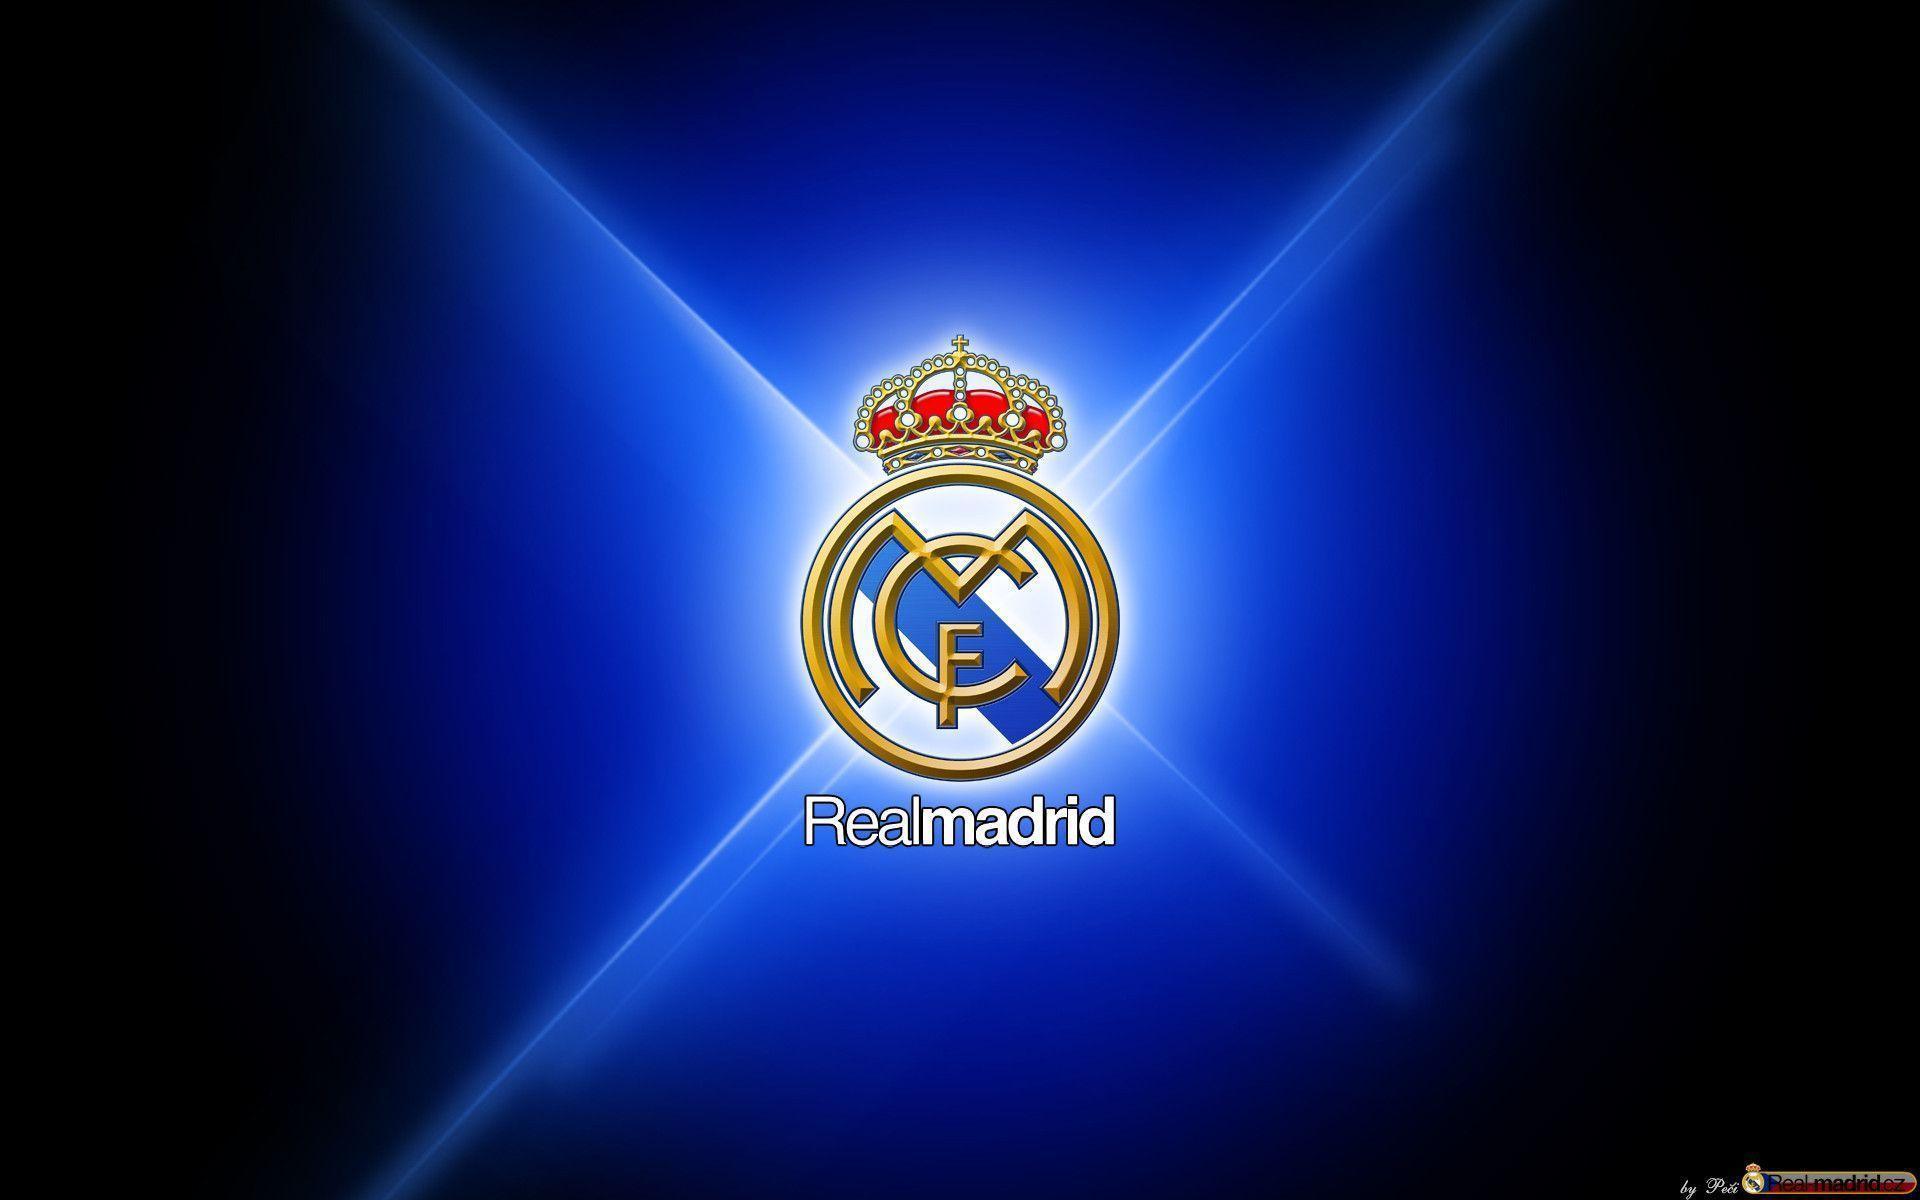 real madrid logo picture download